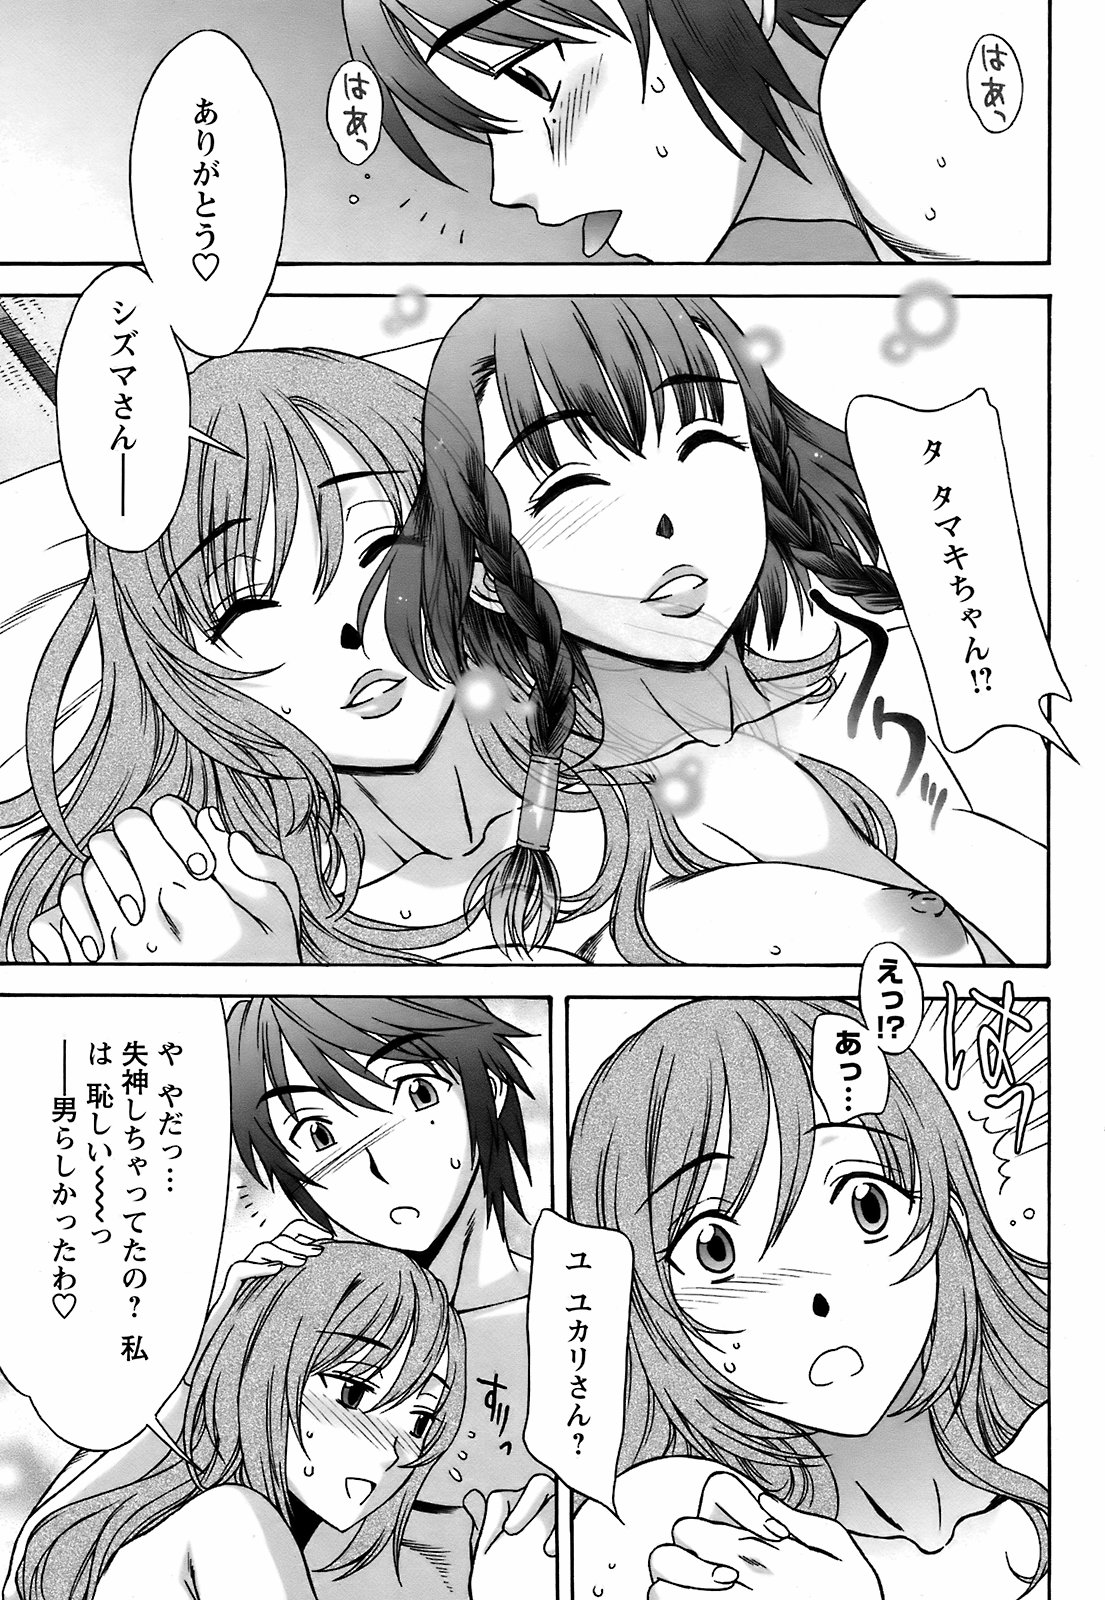 Men's Young Special Ikazuchi Vol 08 page 50 full